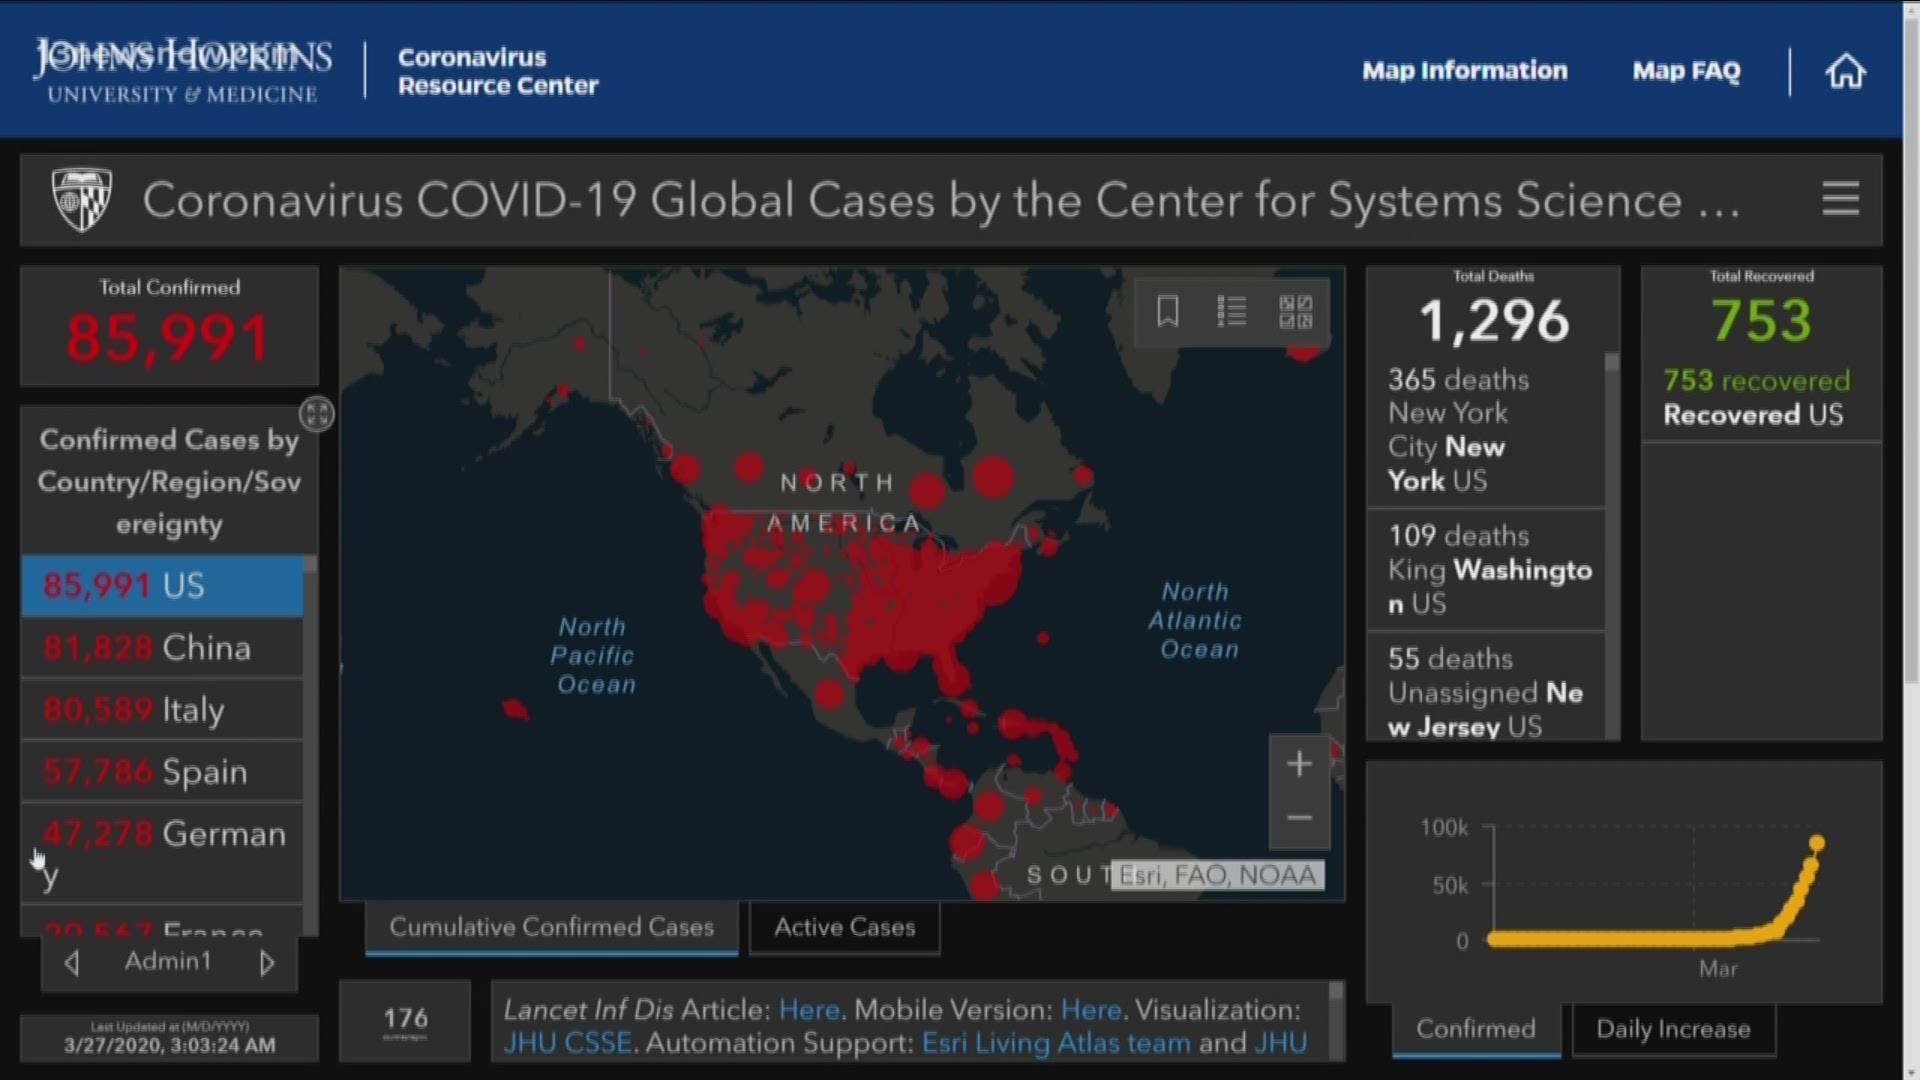 John's Hopkins Coronavirus Resource Center says we've already surpassed China and Italy for the most confirmed cases of COVID-19.